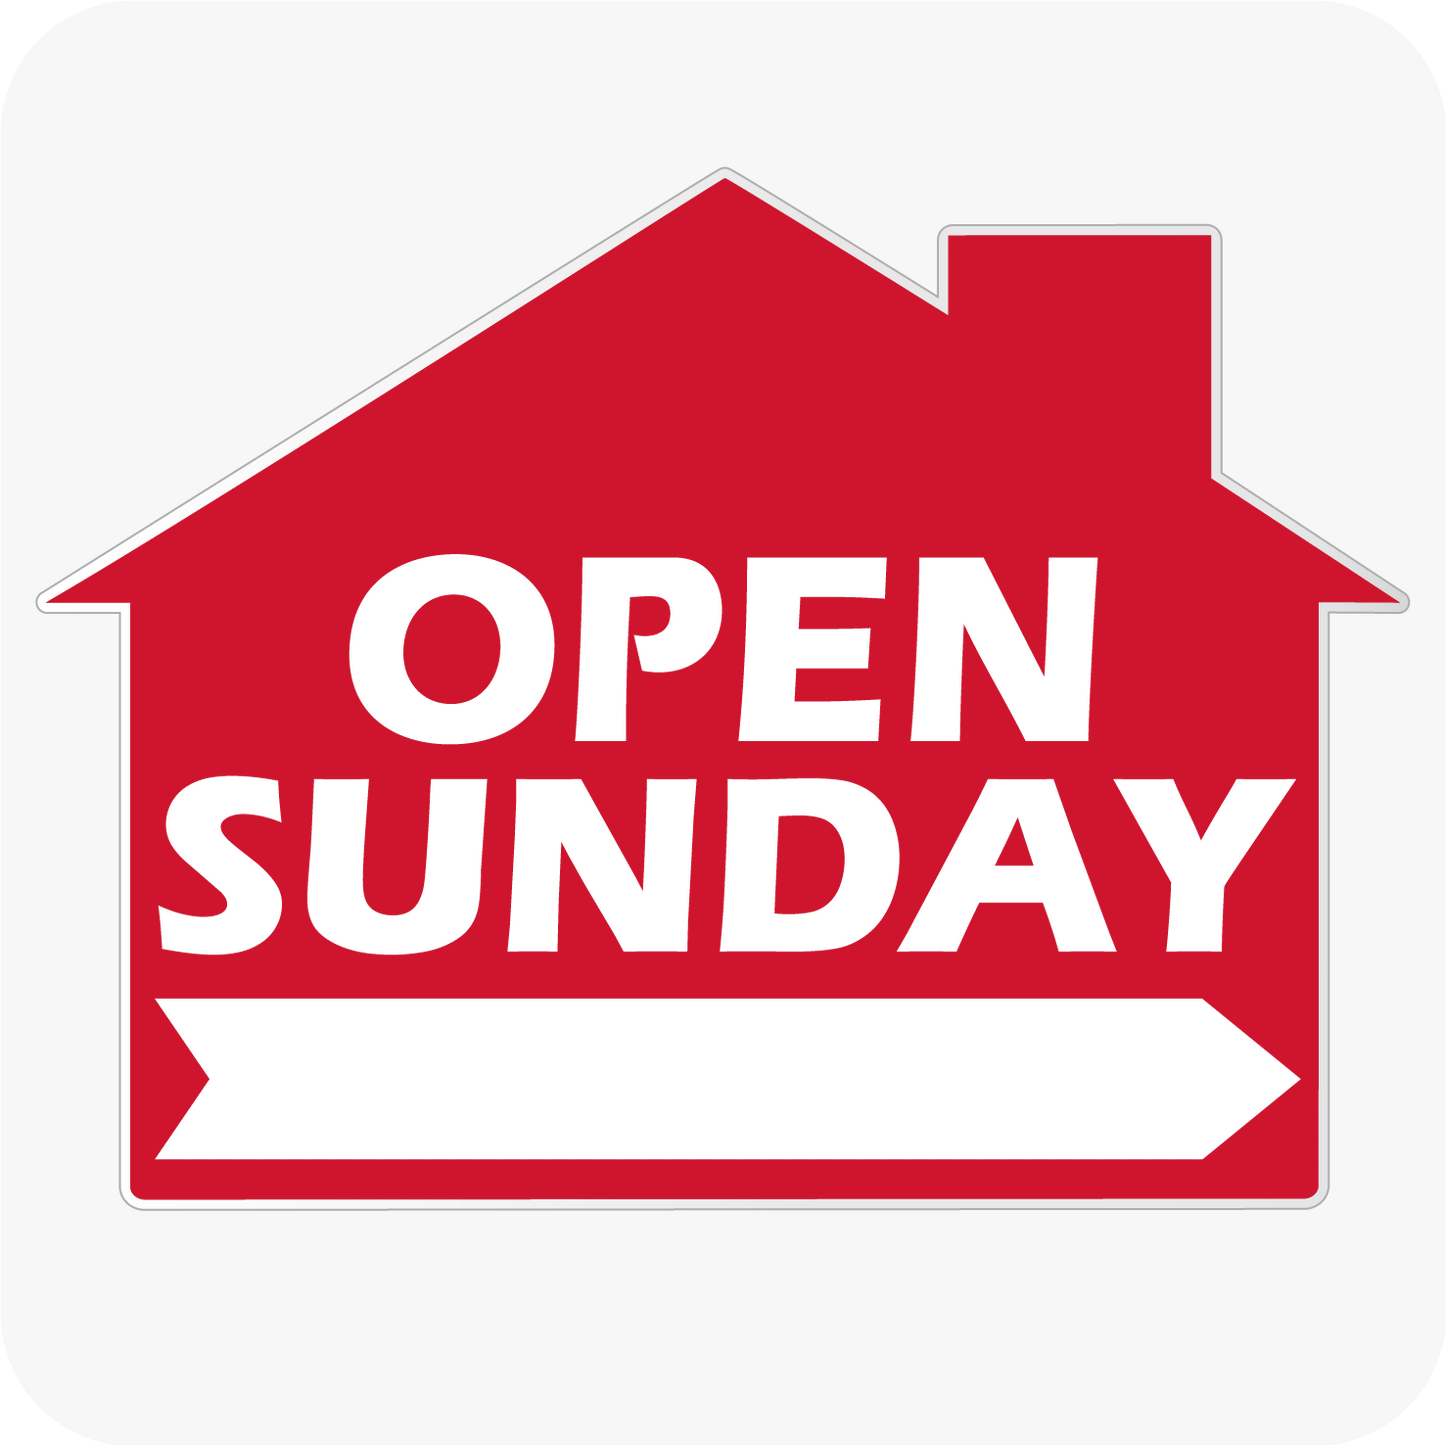 Open Sunday - House Shaped Sign 18x24 - Red